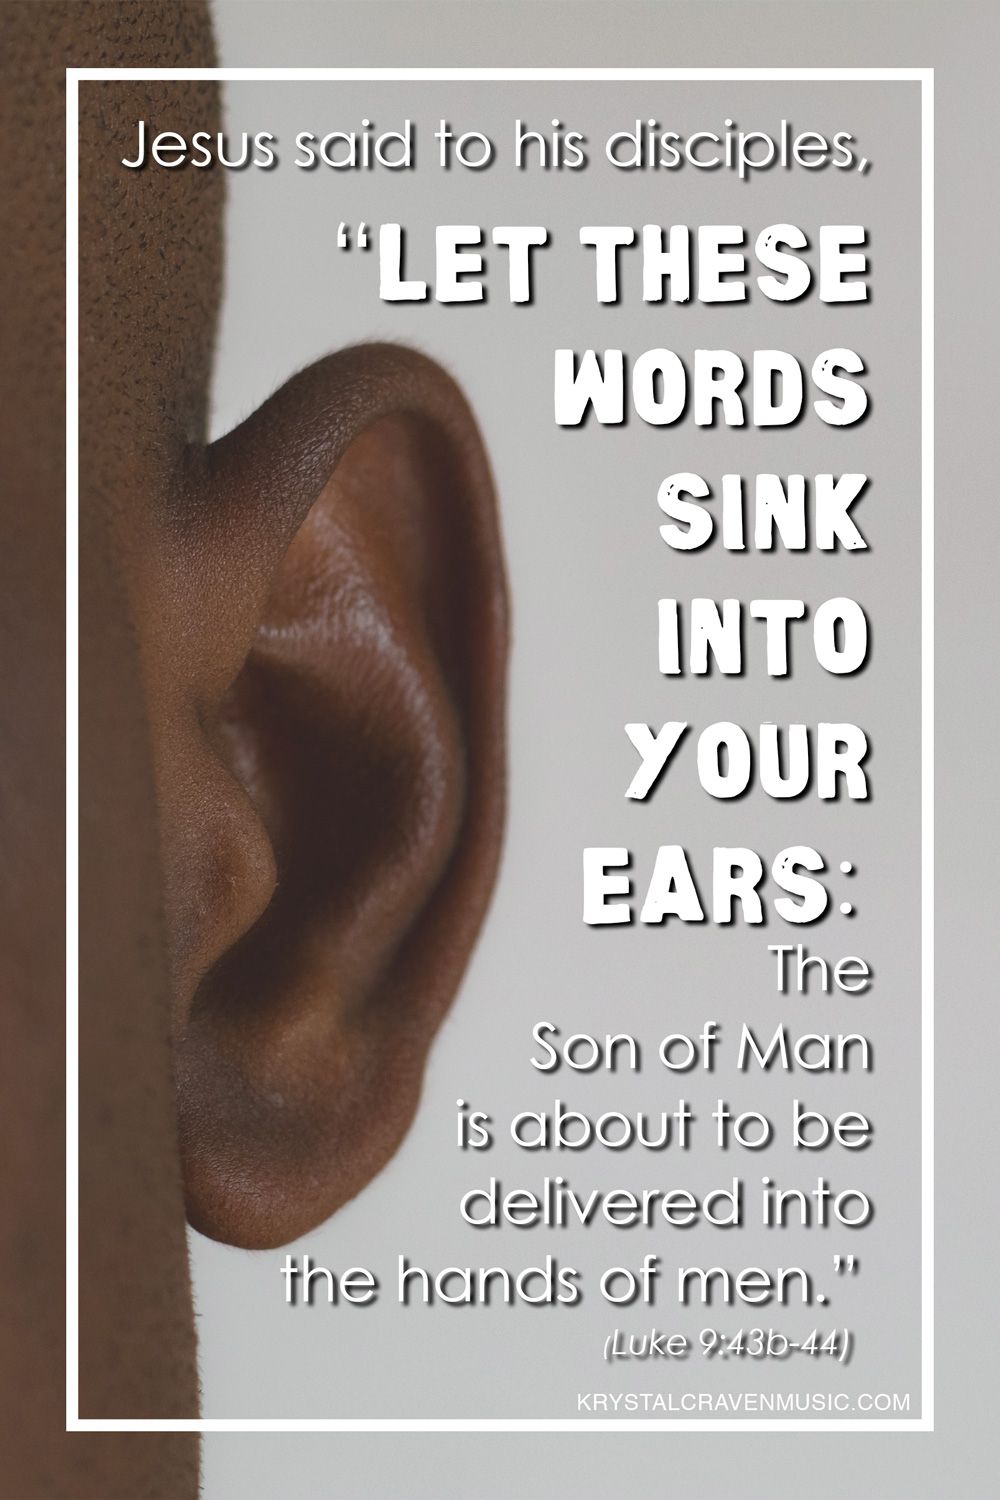 The Bible verse text from Luke 9:43b-44, "Jesus said to his disciples, “Let these words sink into your ears: The Son of Man is about to be delivered into the hands of men.”" in white text with an ear to the left of the text.